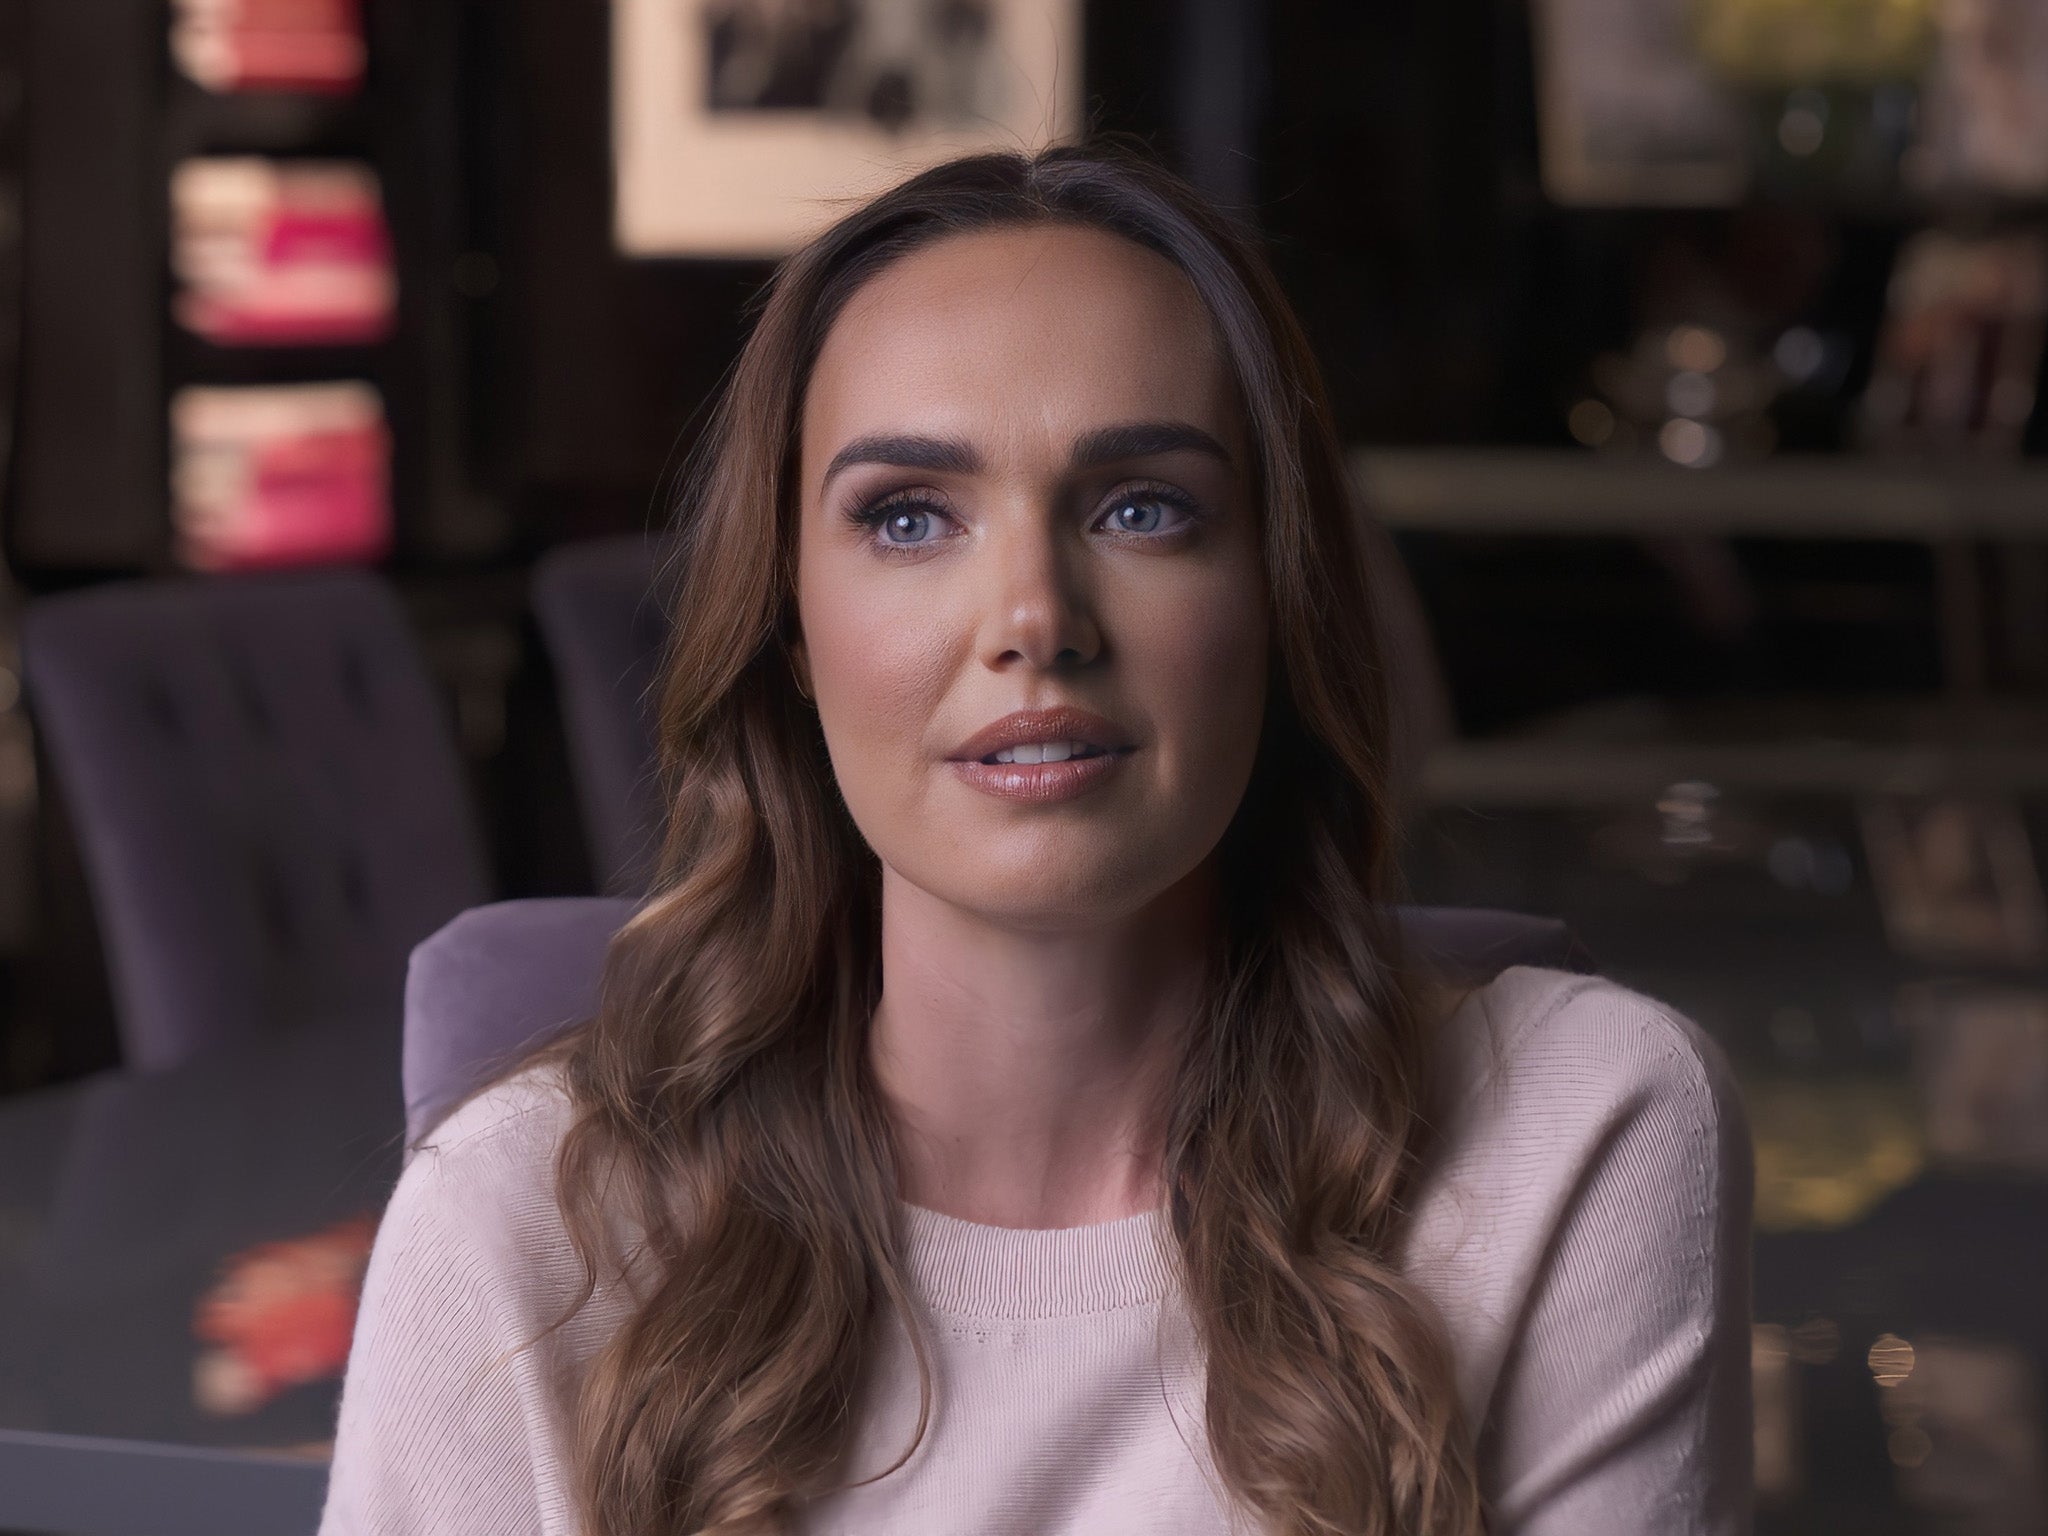 You hardly need to be a Trotskyite to smell something unfair in this documentary featuring Tamara Ecclestone